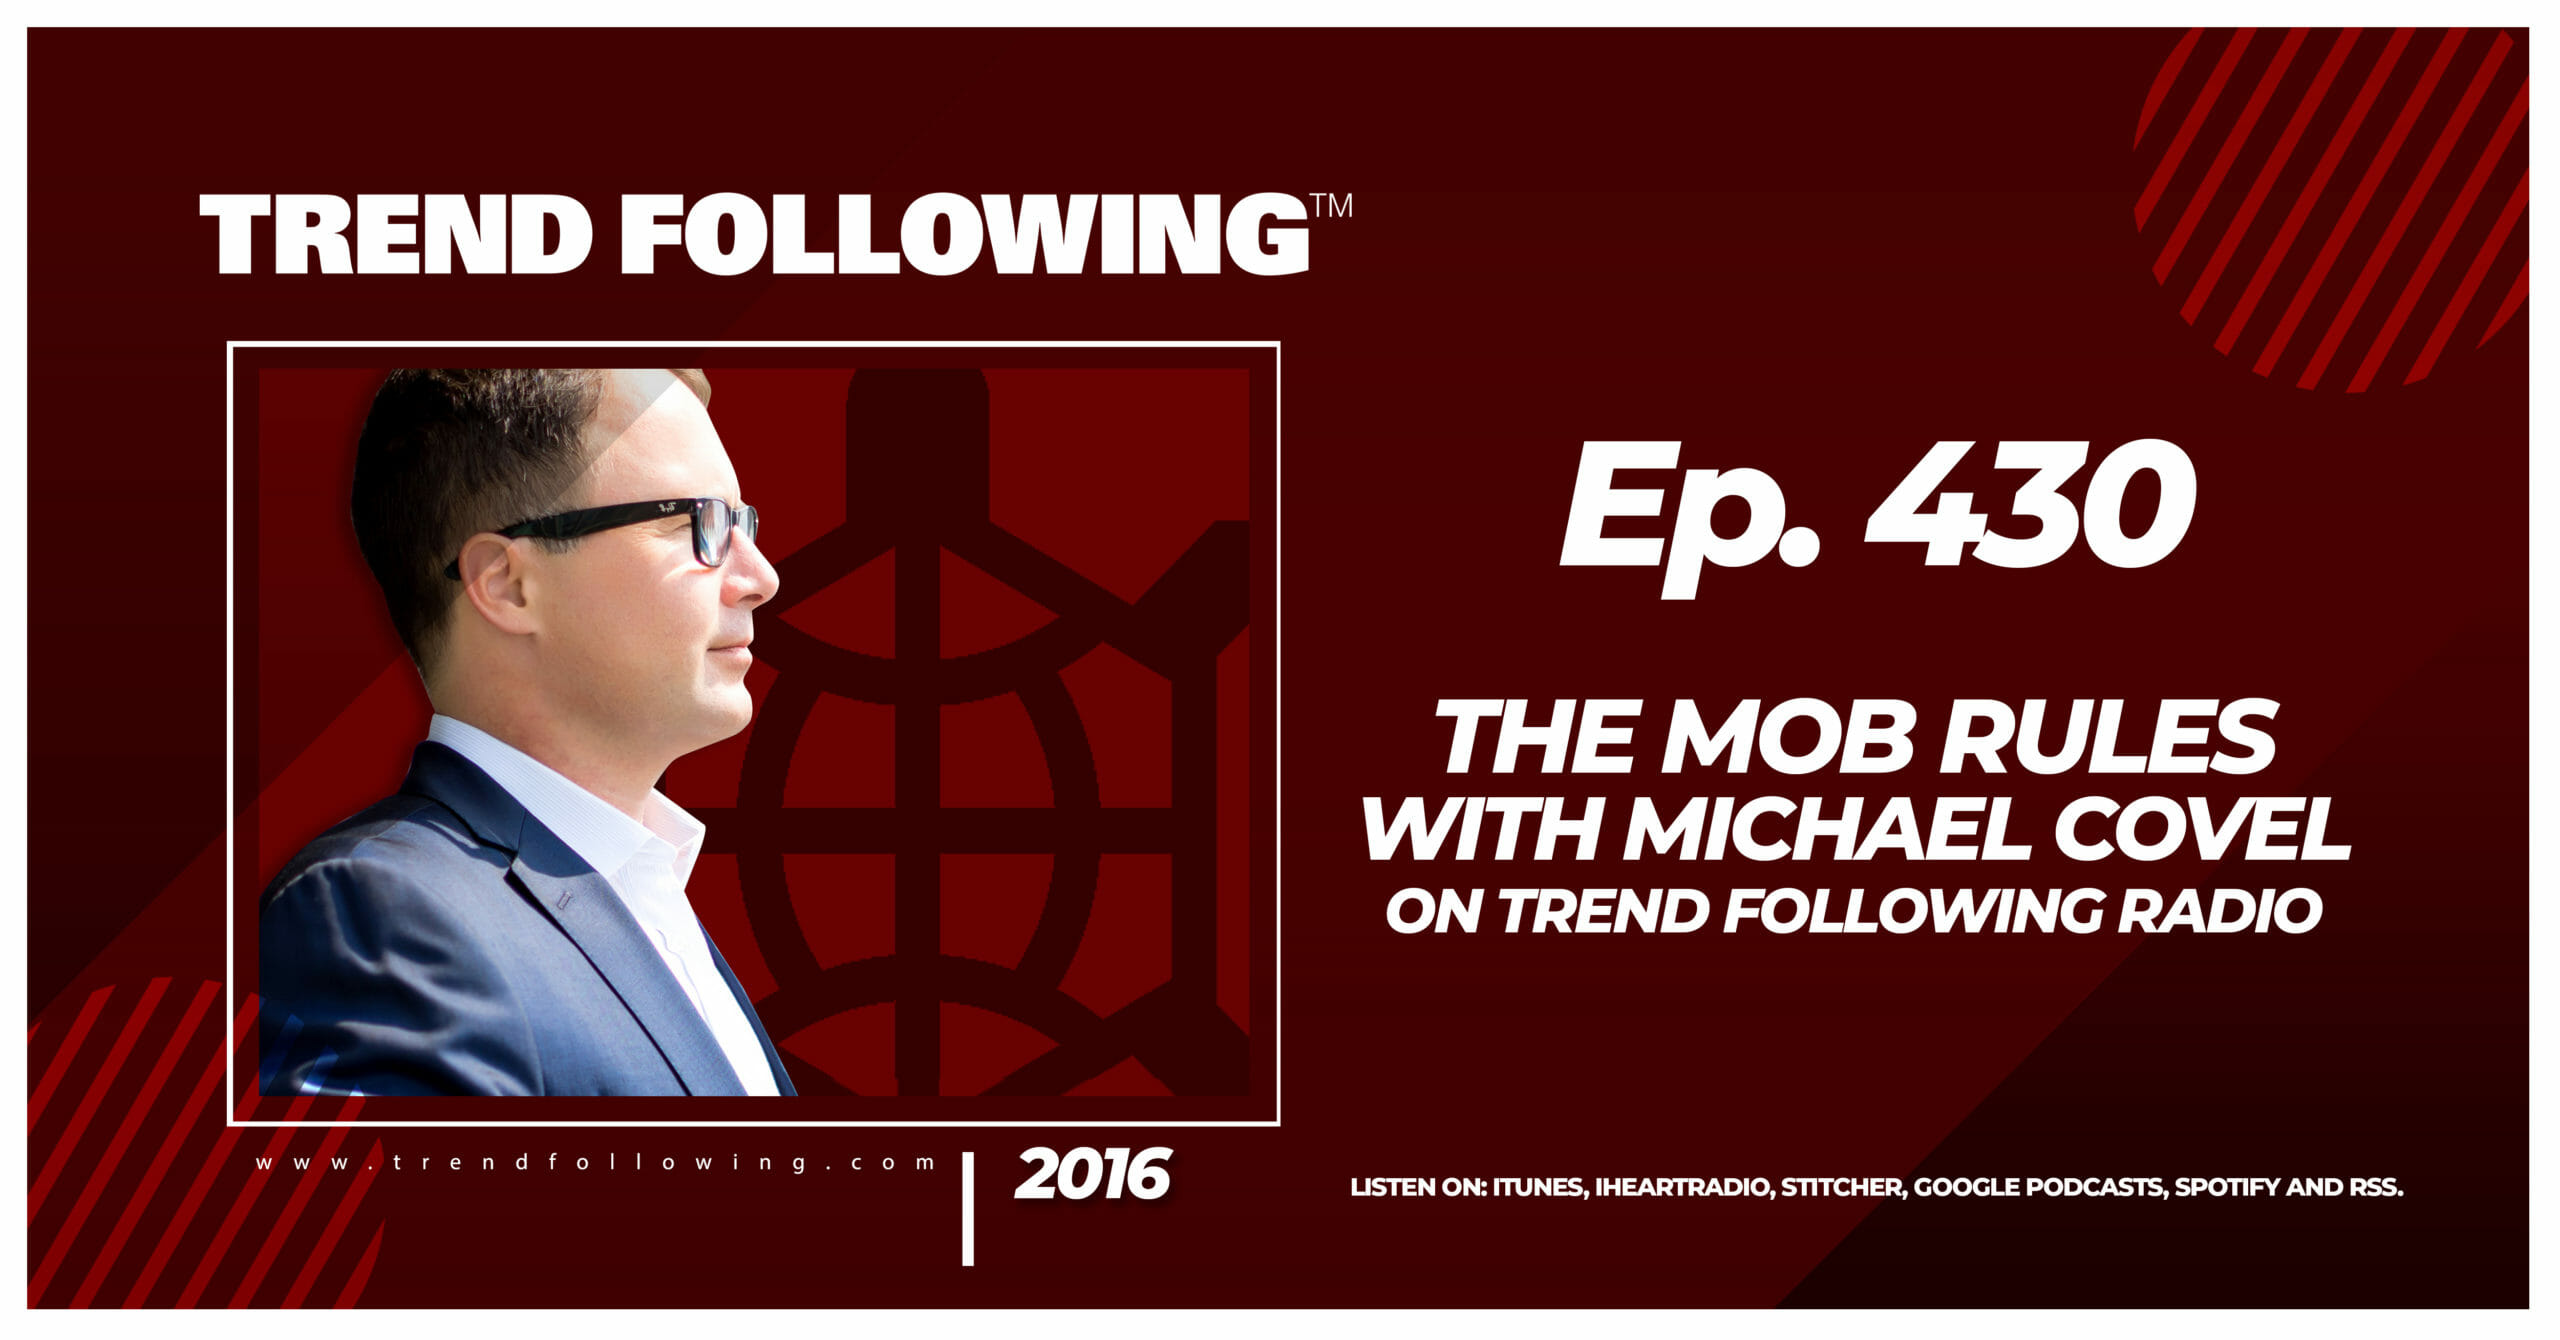 The Mob Rules with Michael Covel on Trend Following Radio